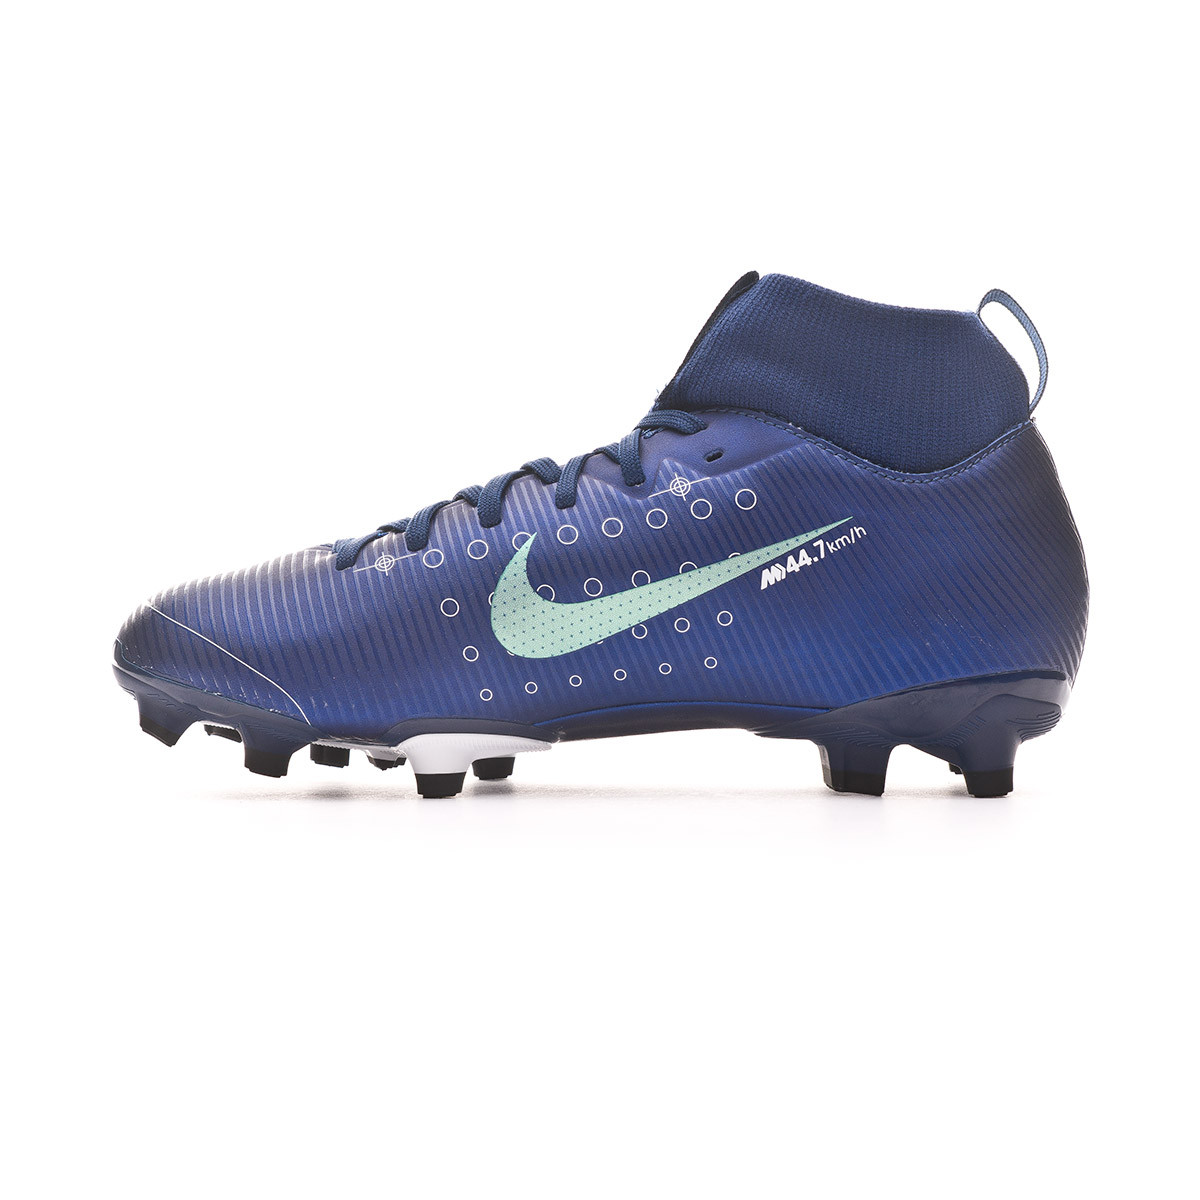 Nike Mercurial Superfly Vi Academy Sg Pro Football Sports Shoes